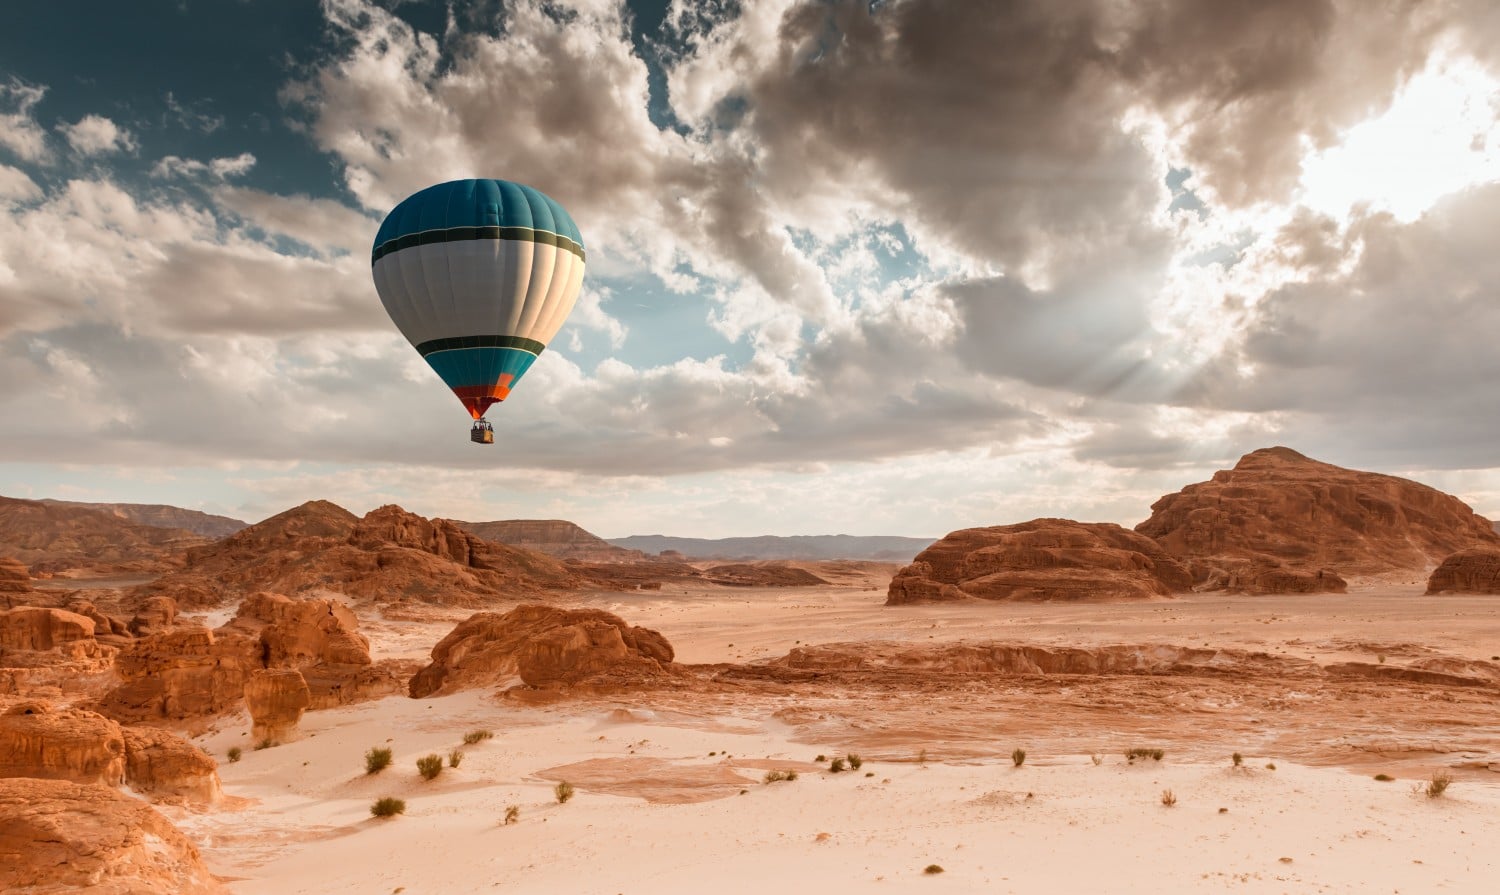 Hot Air Balloon Ride in Dubai - A must try for your visit to Dubai